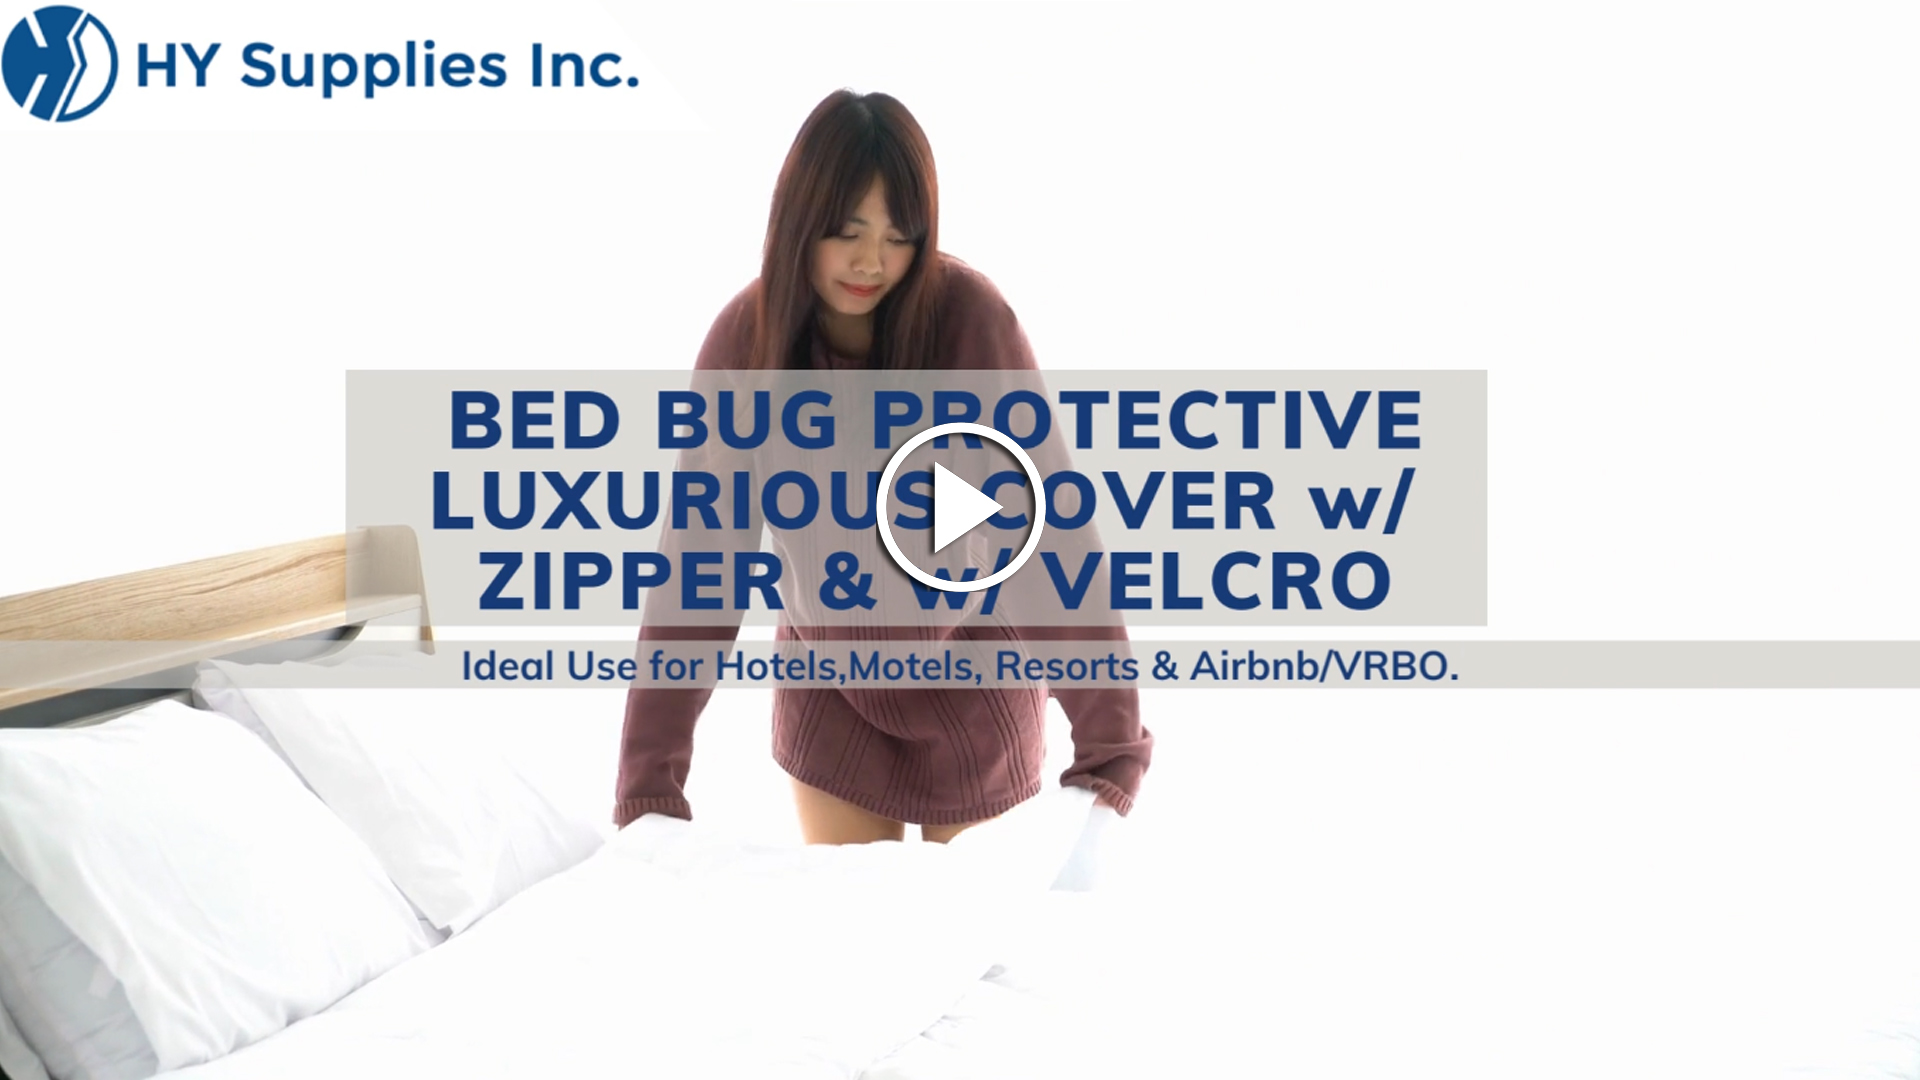 Bed Bug Protective Luxurious Cover with ZIPPER & VELCRO (12" POCKET)